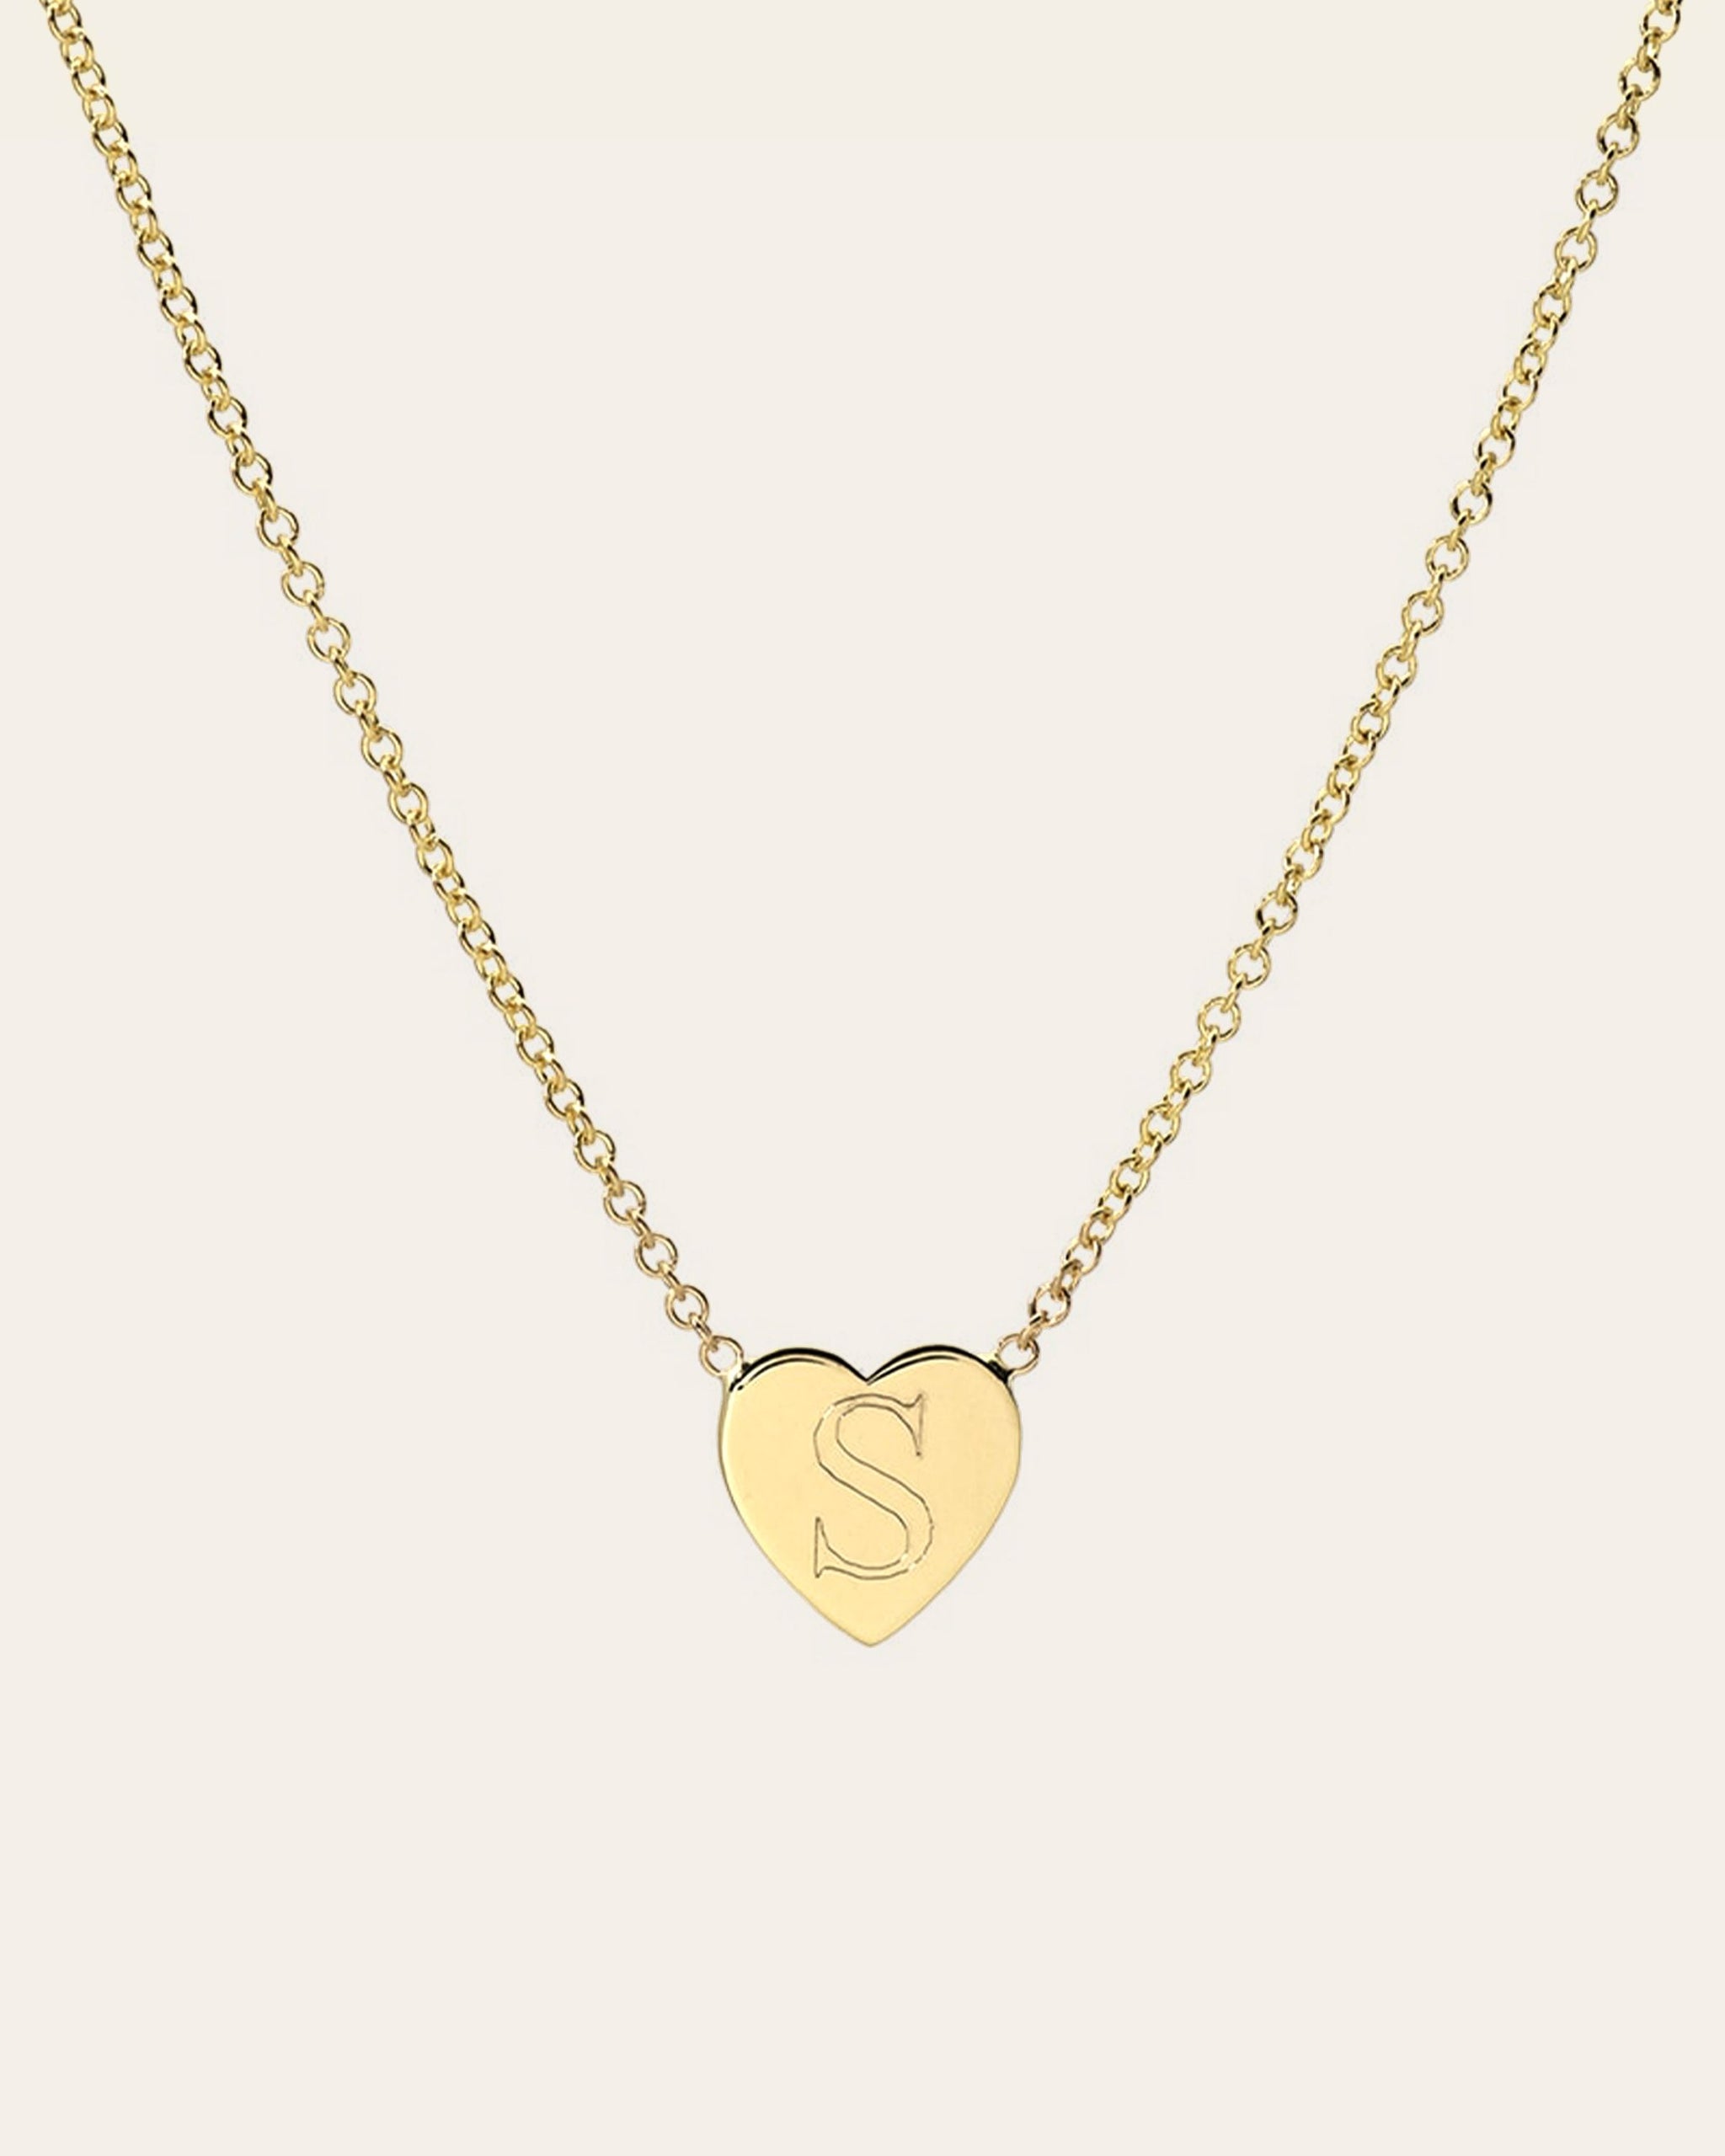 14K Gold Circle Initial Charm Necklace - Balsamroot Jewelry